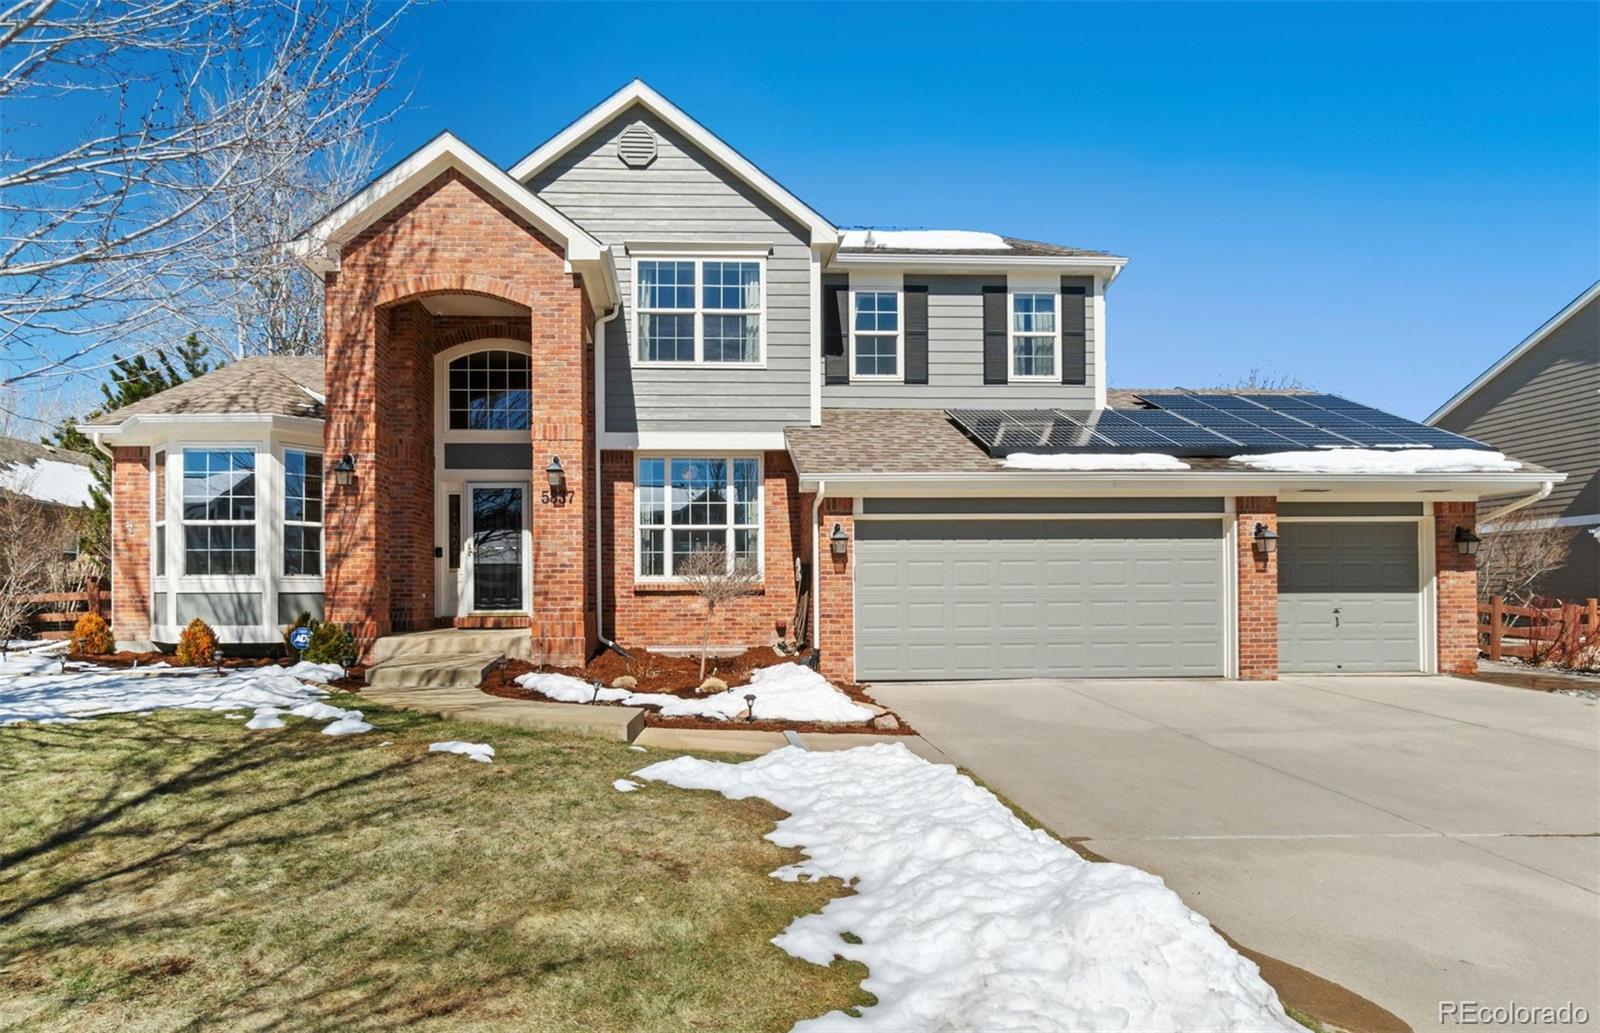 Report Image for 5837  Brook Hollow Drive,Broomfield, Colorado